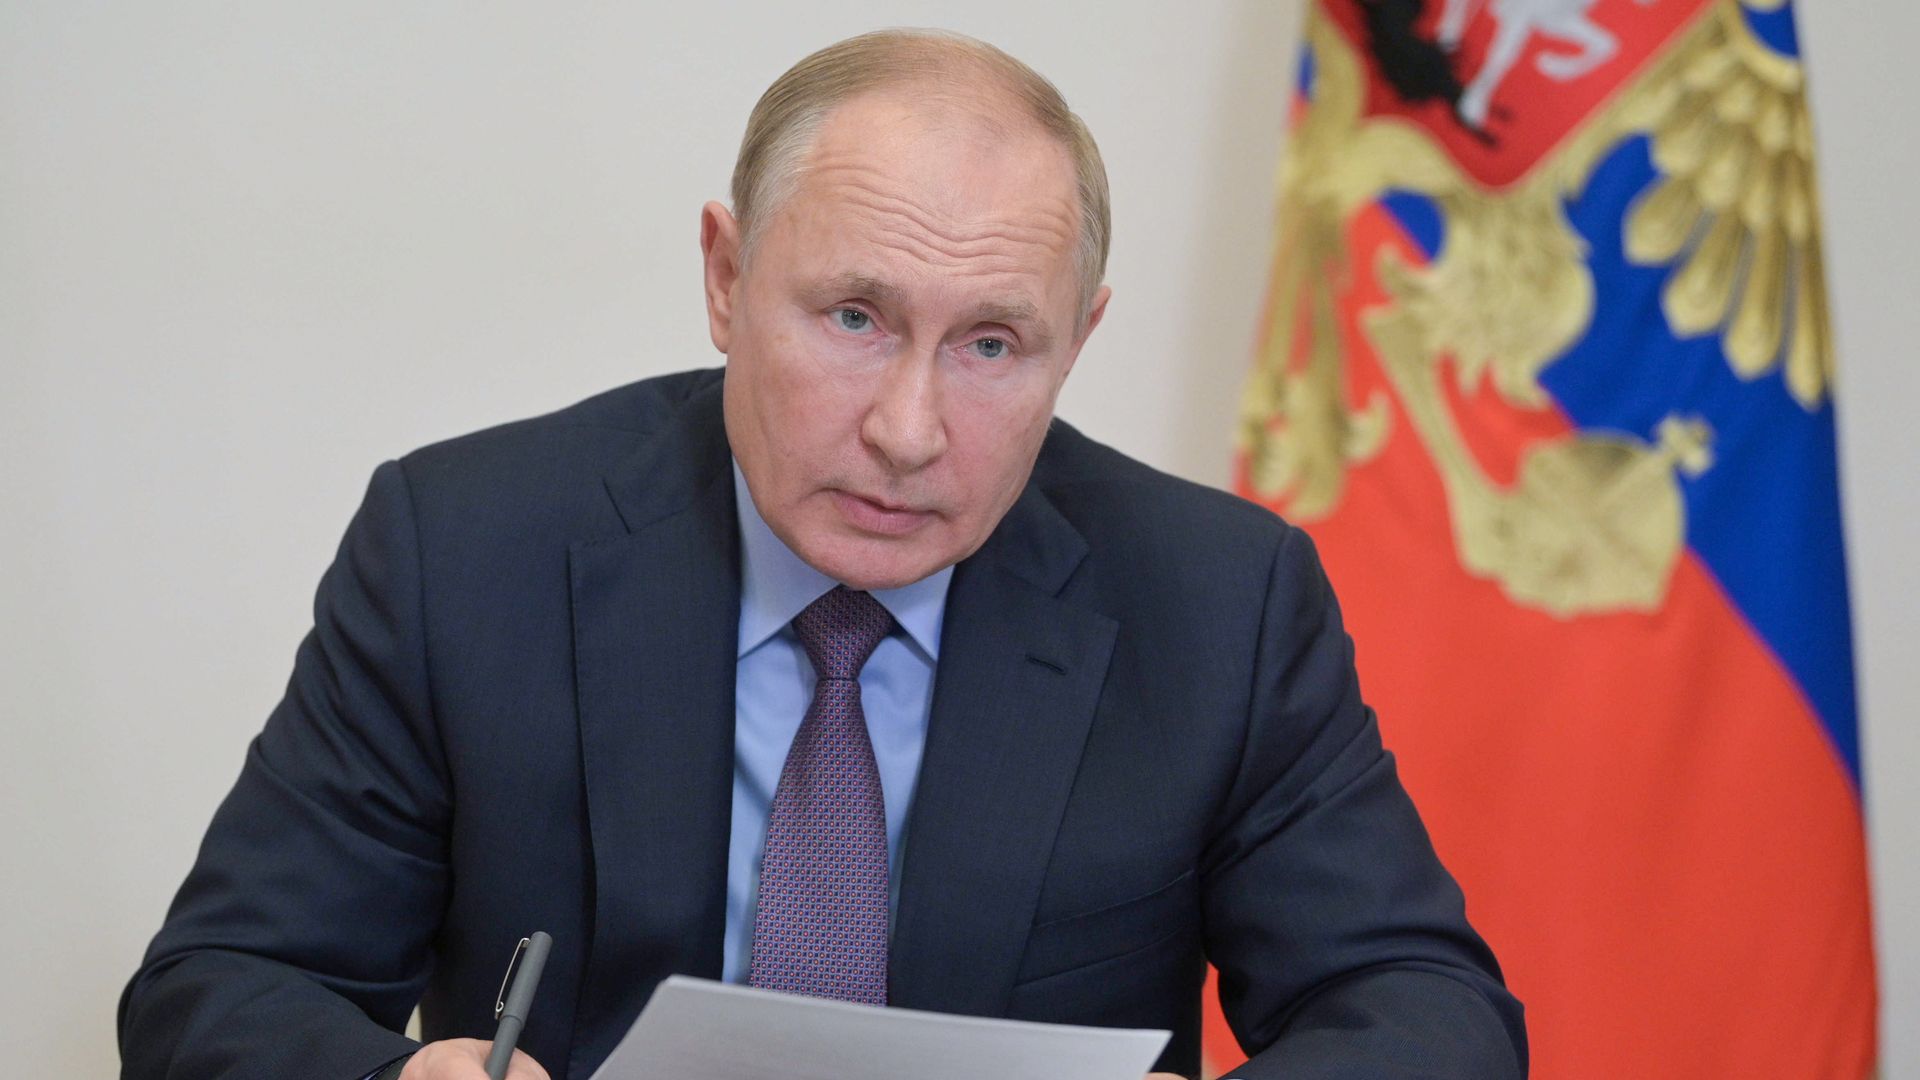 Vladimir Putin during a video conference in the Moscow region on Sept. 14.